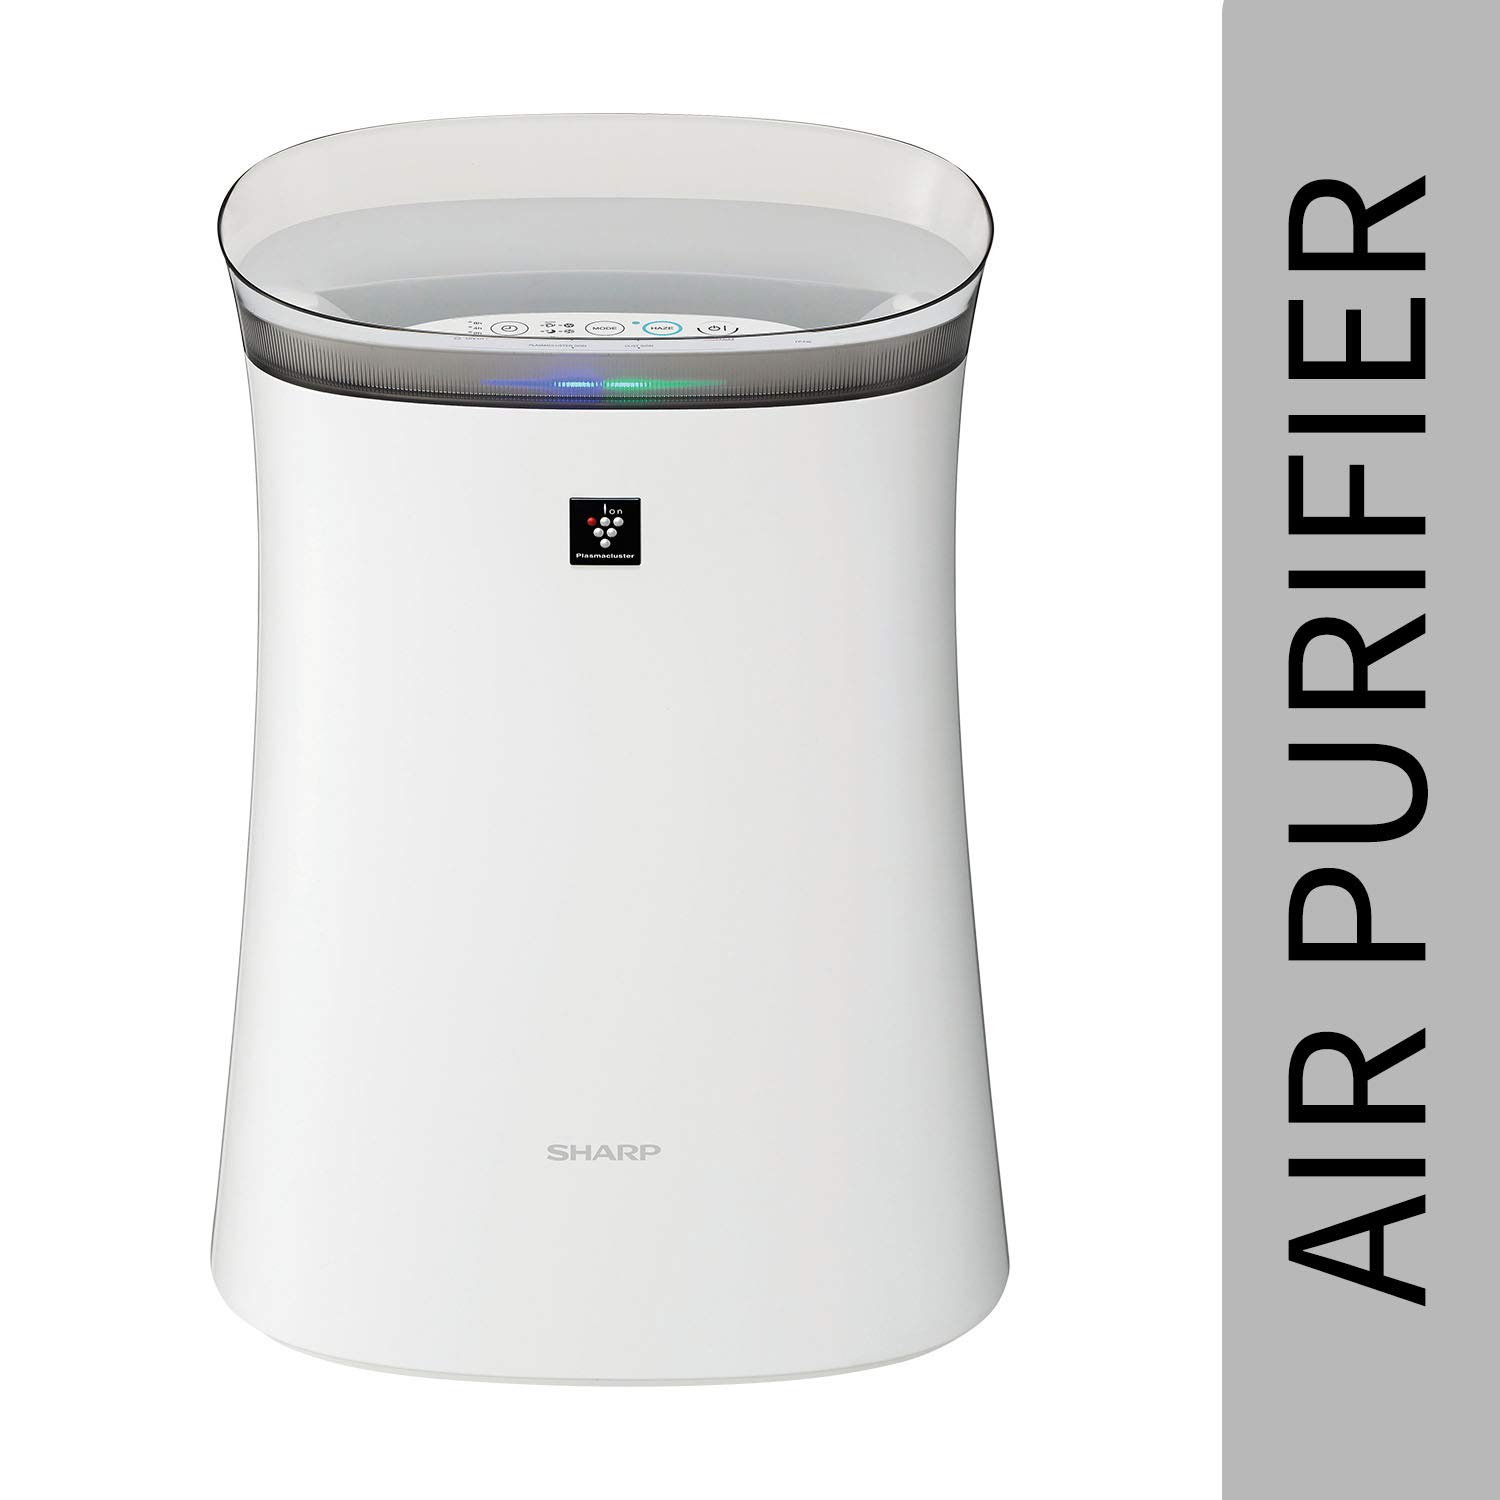 Sharp manufactures the best air purifier in India